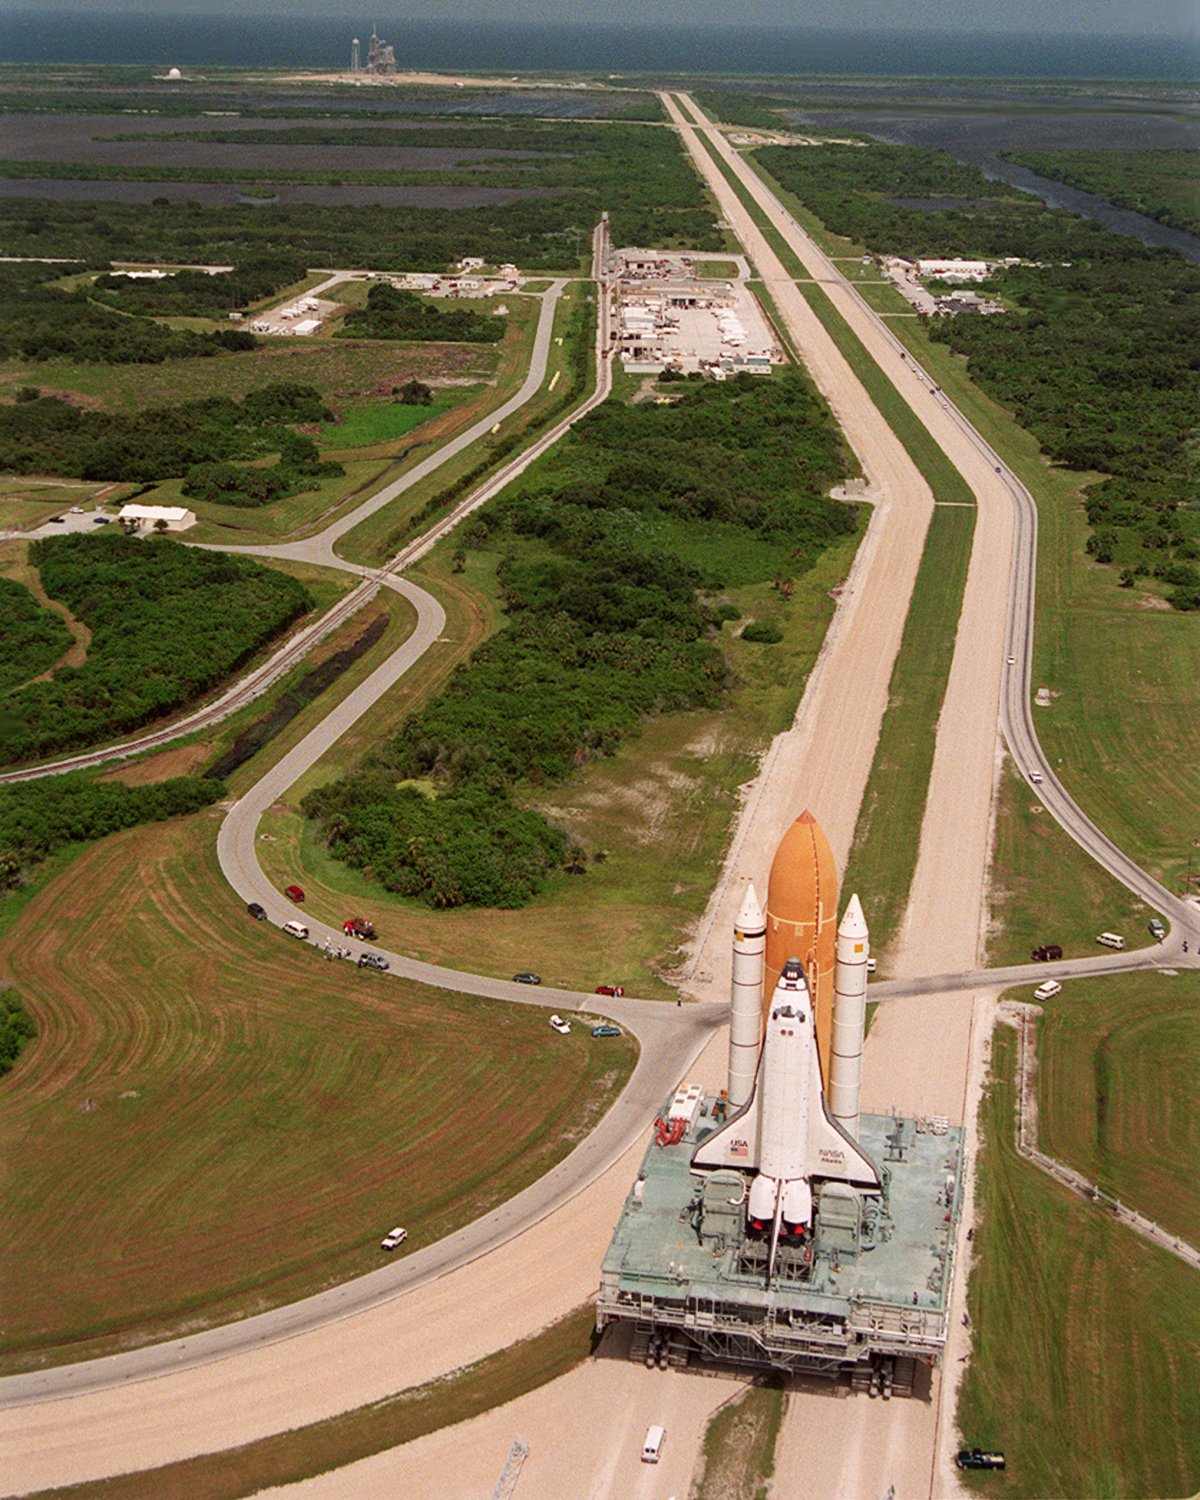 SPACE SHUTTLE ATLANTIS ROLLS TO LAUNCH PAD FOR STS-79 8X10 NASA PHOTO (EP-412)